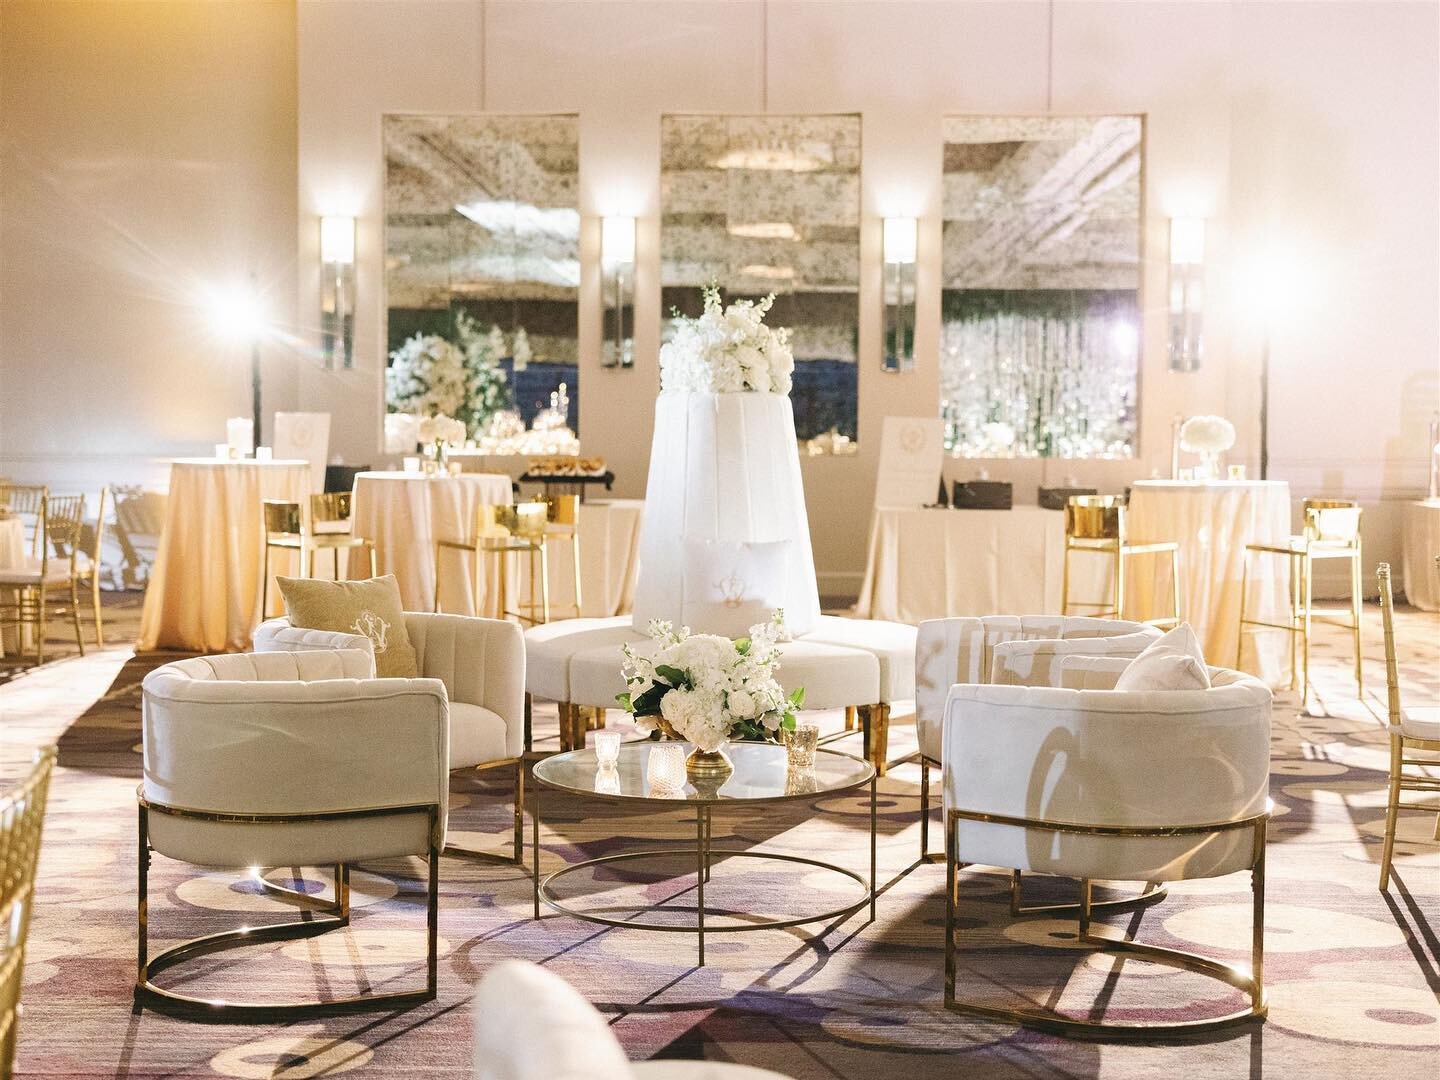 Sooo ready for some warmer weather and less snow and ice but while we&rsquo;re all enjoying our cozy living rooms I wanted to share this exquisite lounge space at Savannah + Wade&rsquo;s reception 🤩
@erinwilsonphoto 
@eventology_us 
@silksabloom 
@c